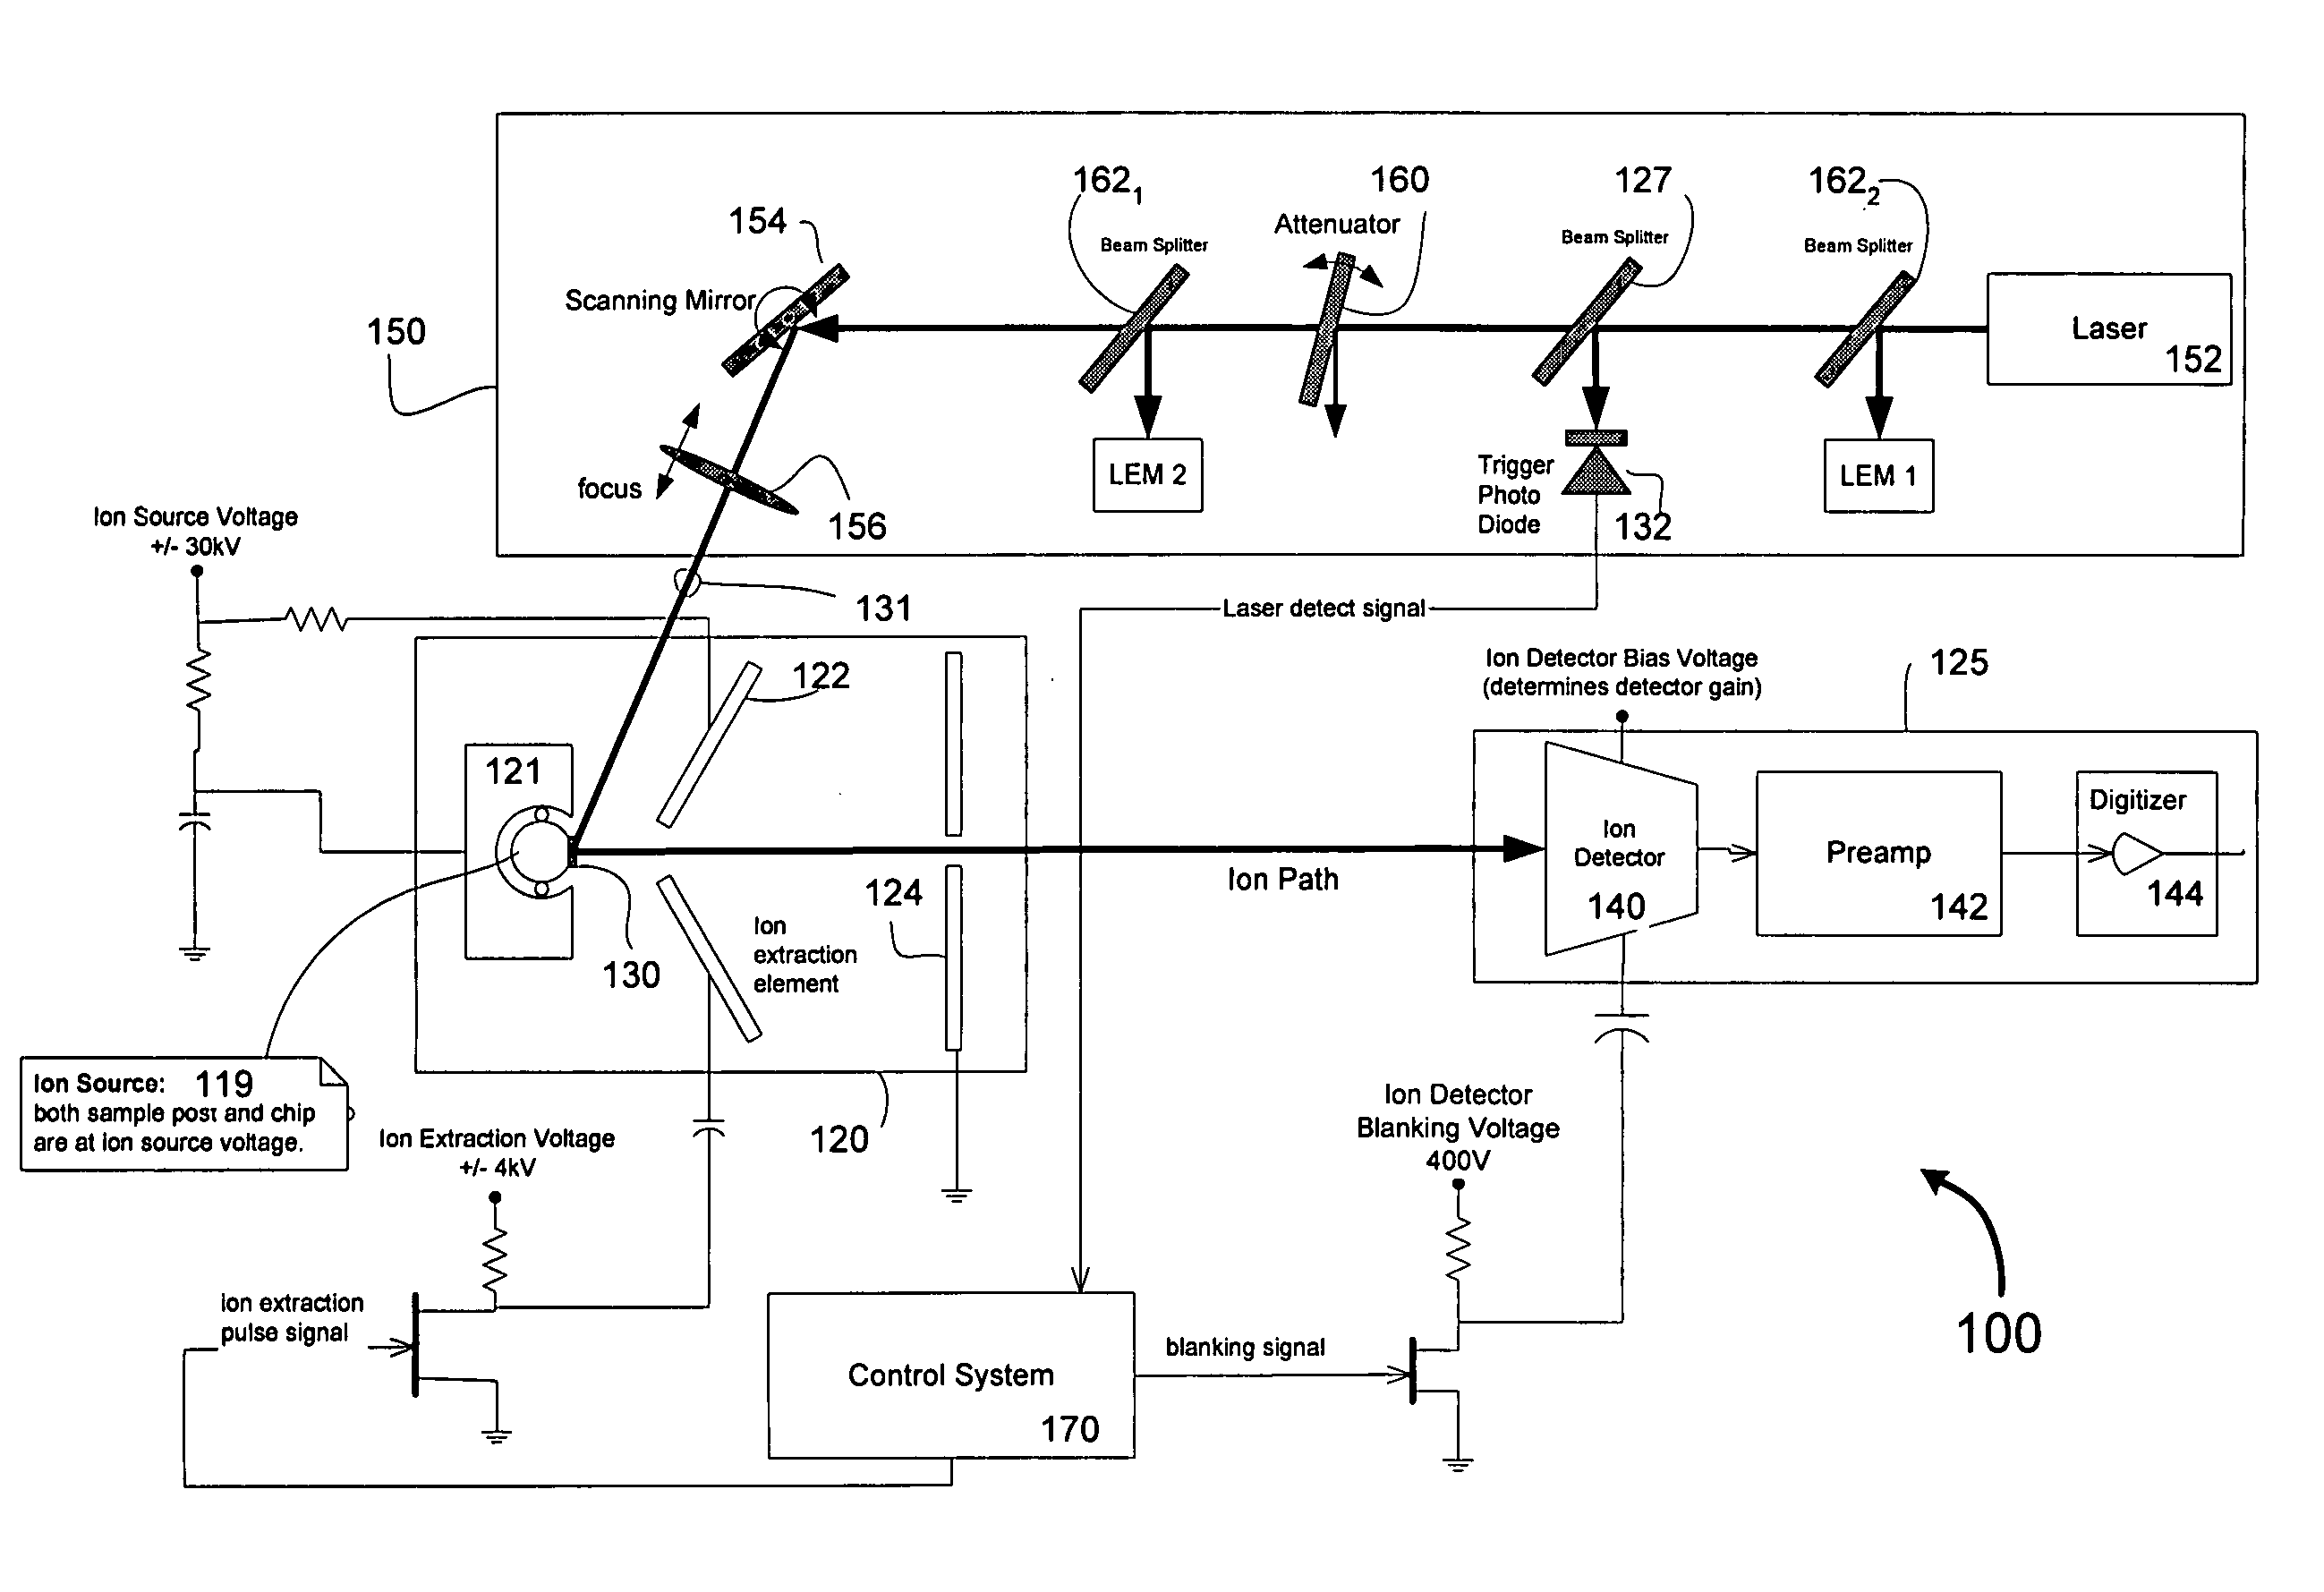 Non-linear signal amplifiers and uses thereof in a mass spectrometer device